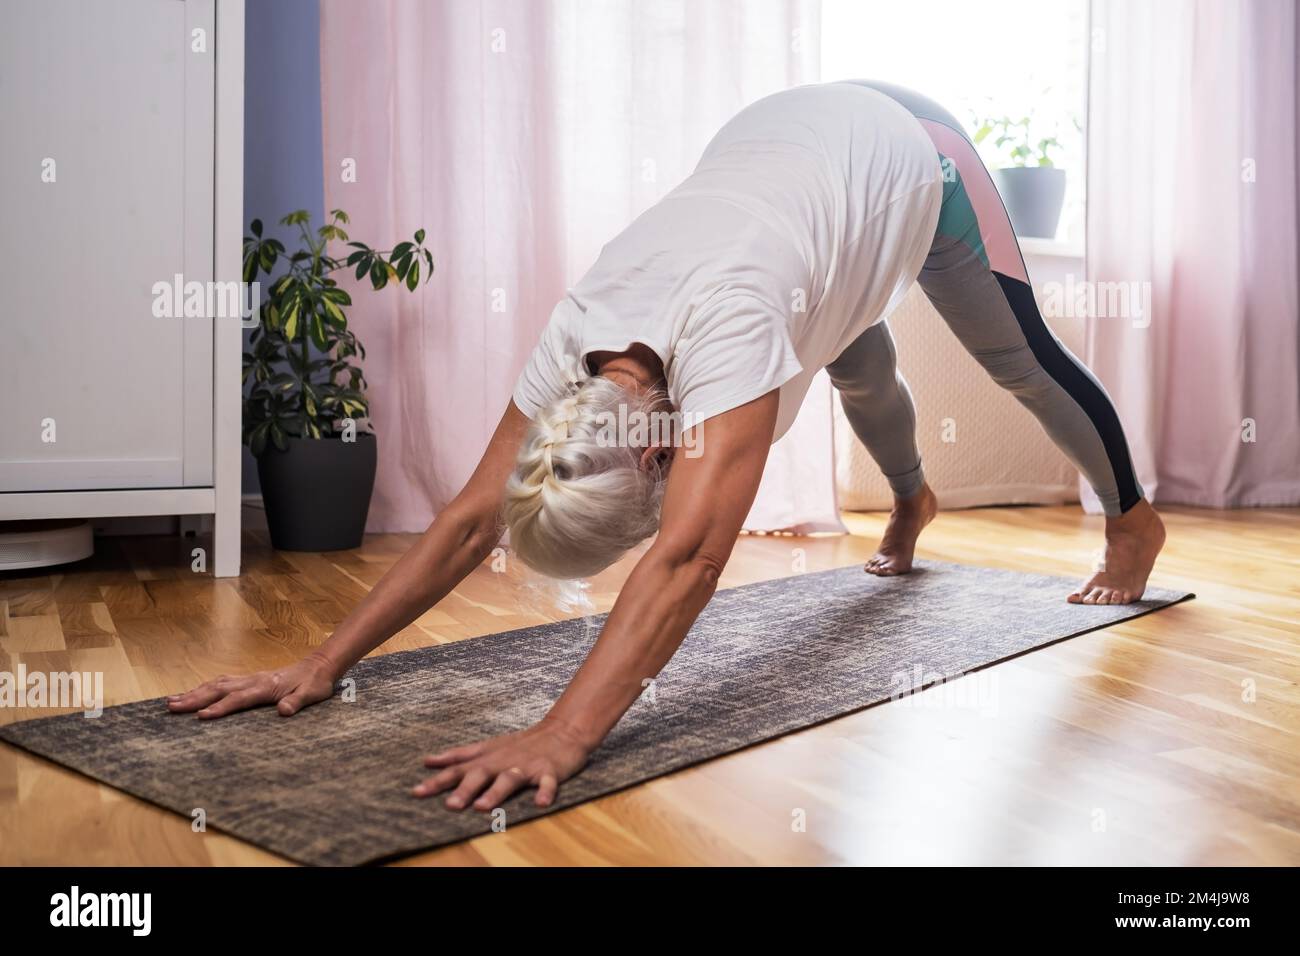 Senior woman doing yoga exercise in the room downward facing dog pose  Stock Photo